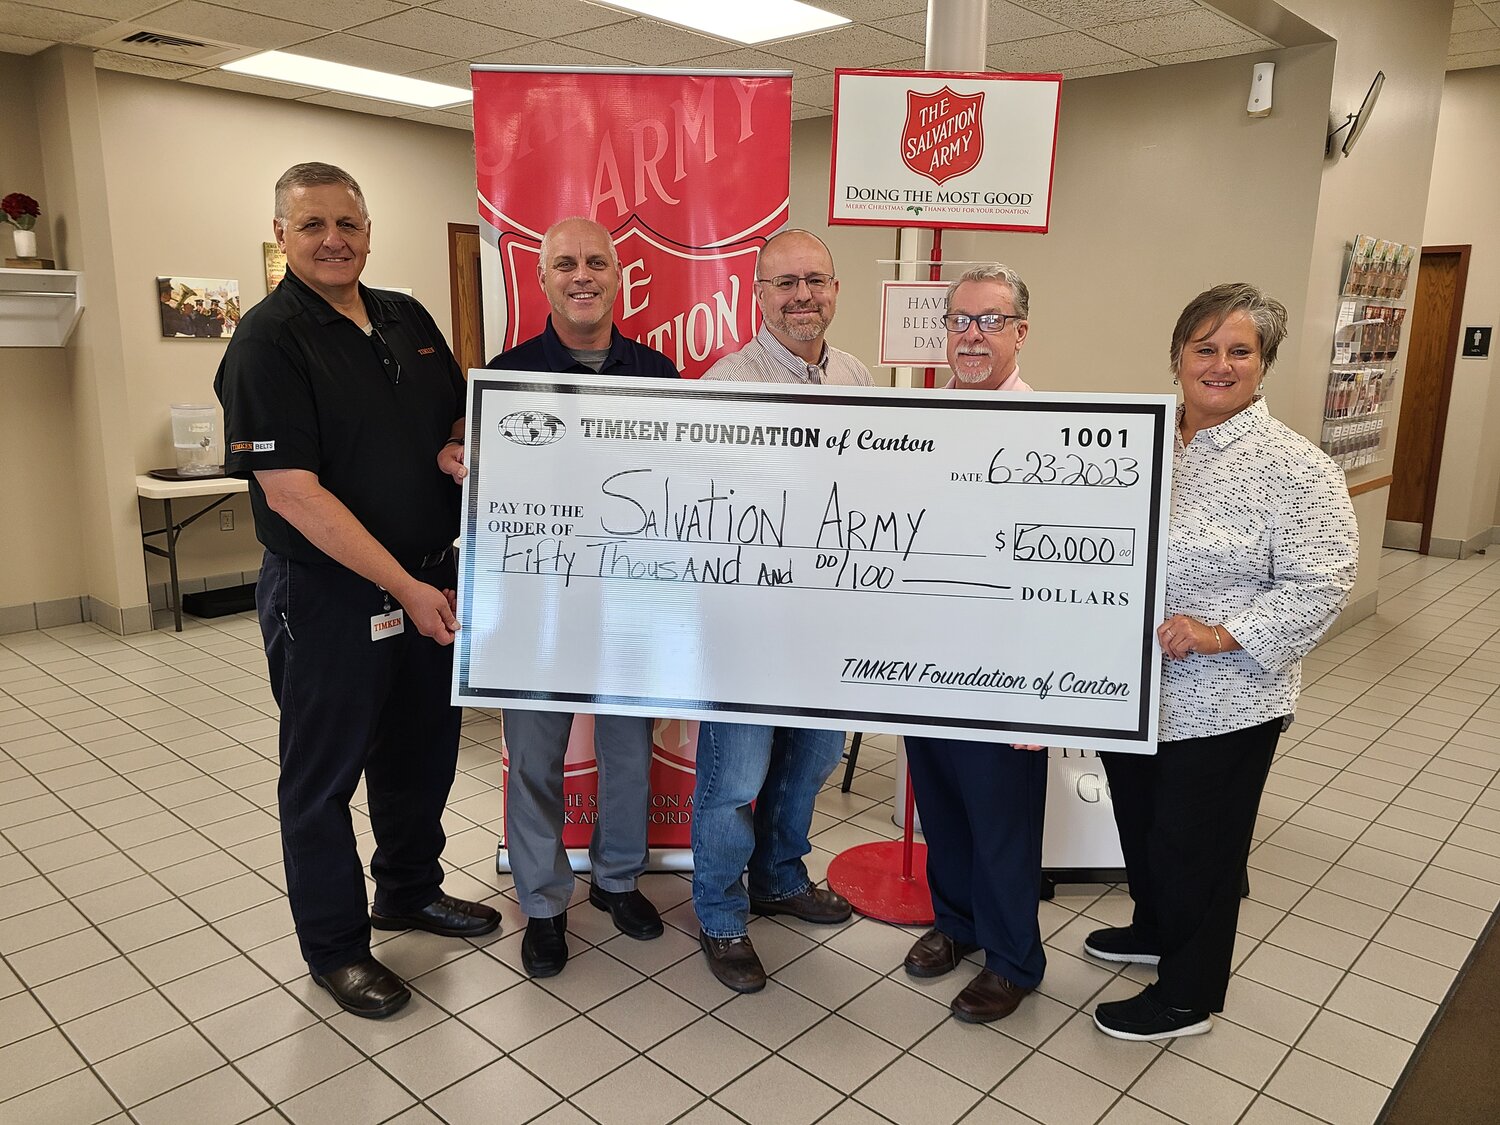 A check is presented to The Salvation Army.